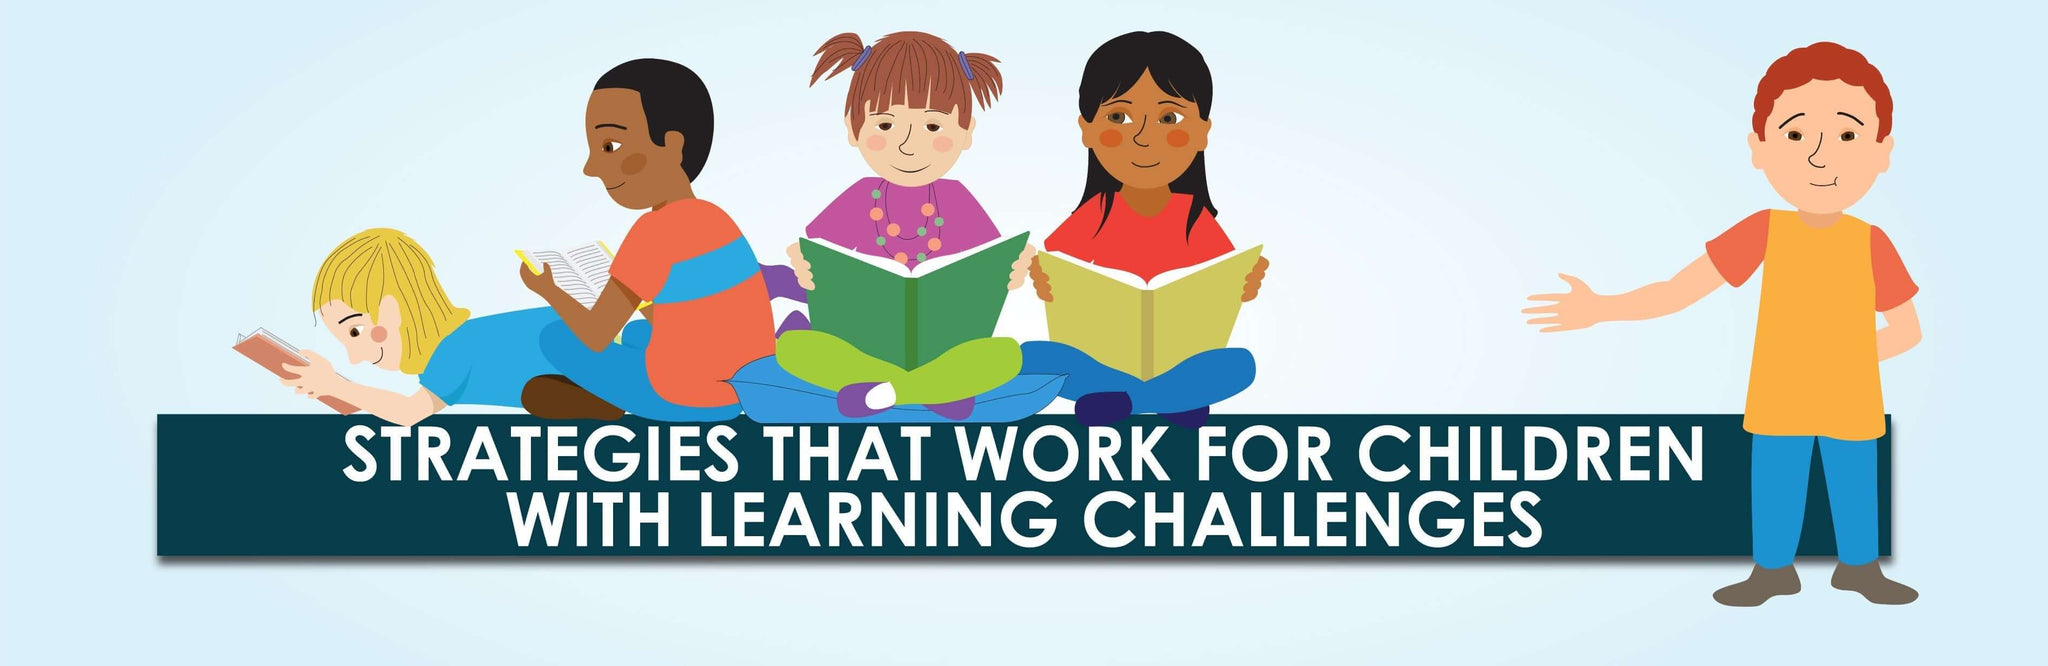 Strategies that Work for Children with Learning Challenges